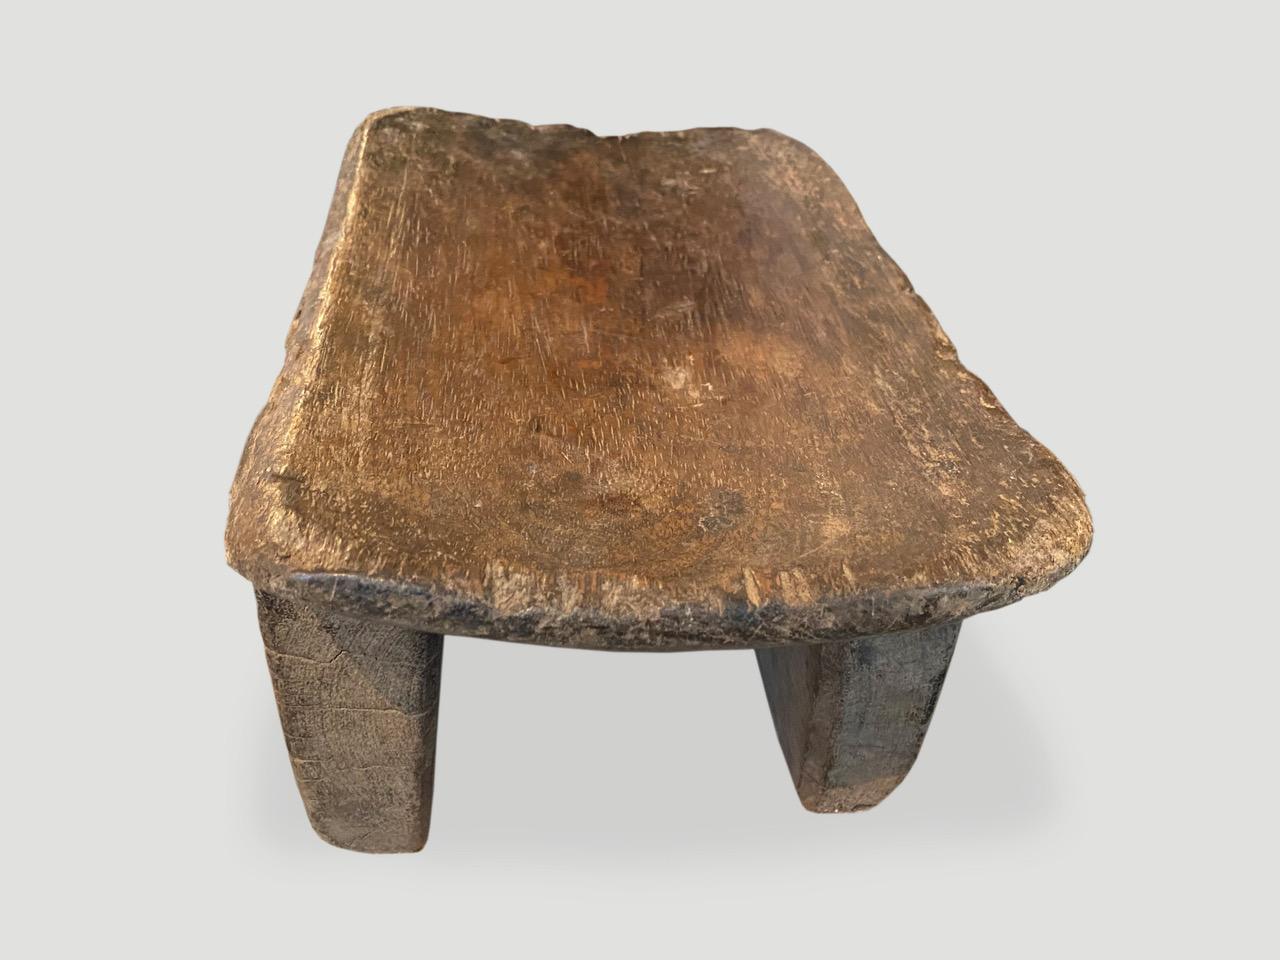 Lovely patina on this beautiful African stool hand carved from a single piece of wood. Great for placing a book or perhaps towels in a bathroom, magazines etc.

This stool was sourced in the spirit of wabi-sabi, a Japanese philosophy that beauty